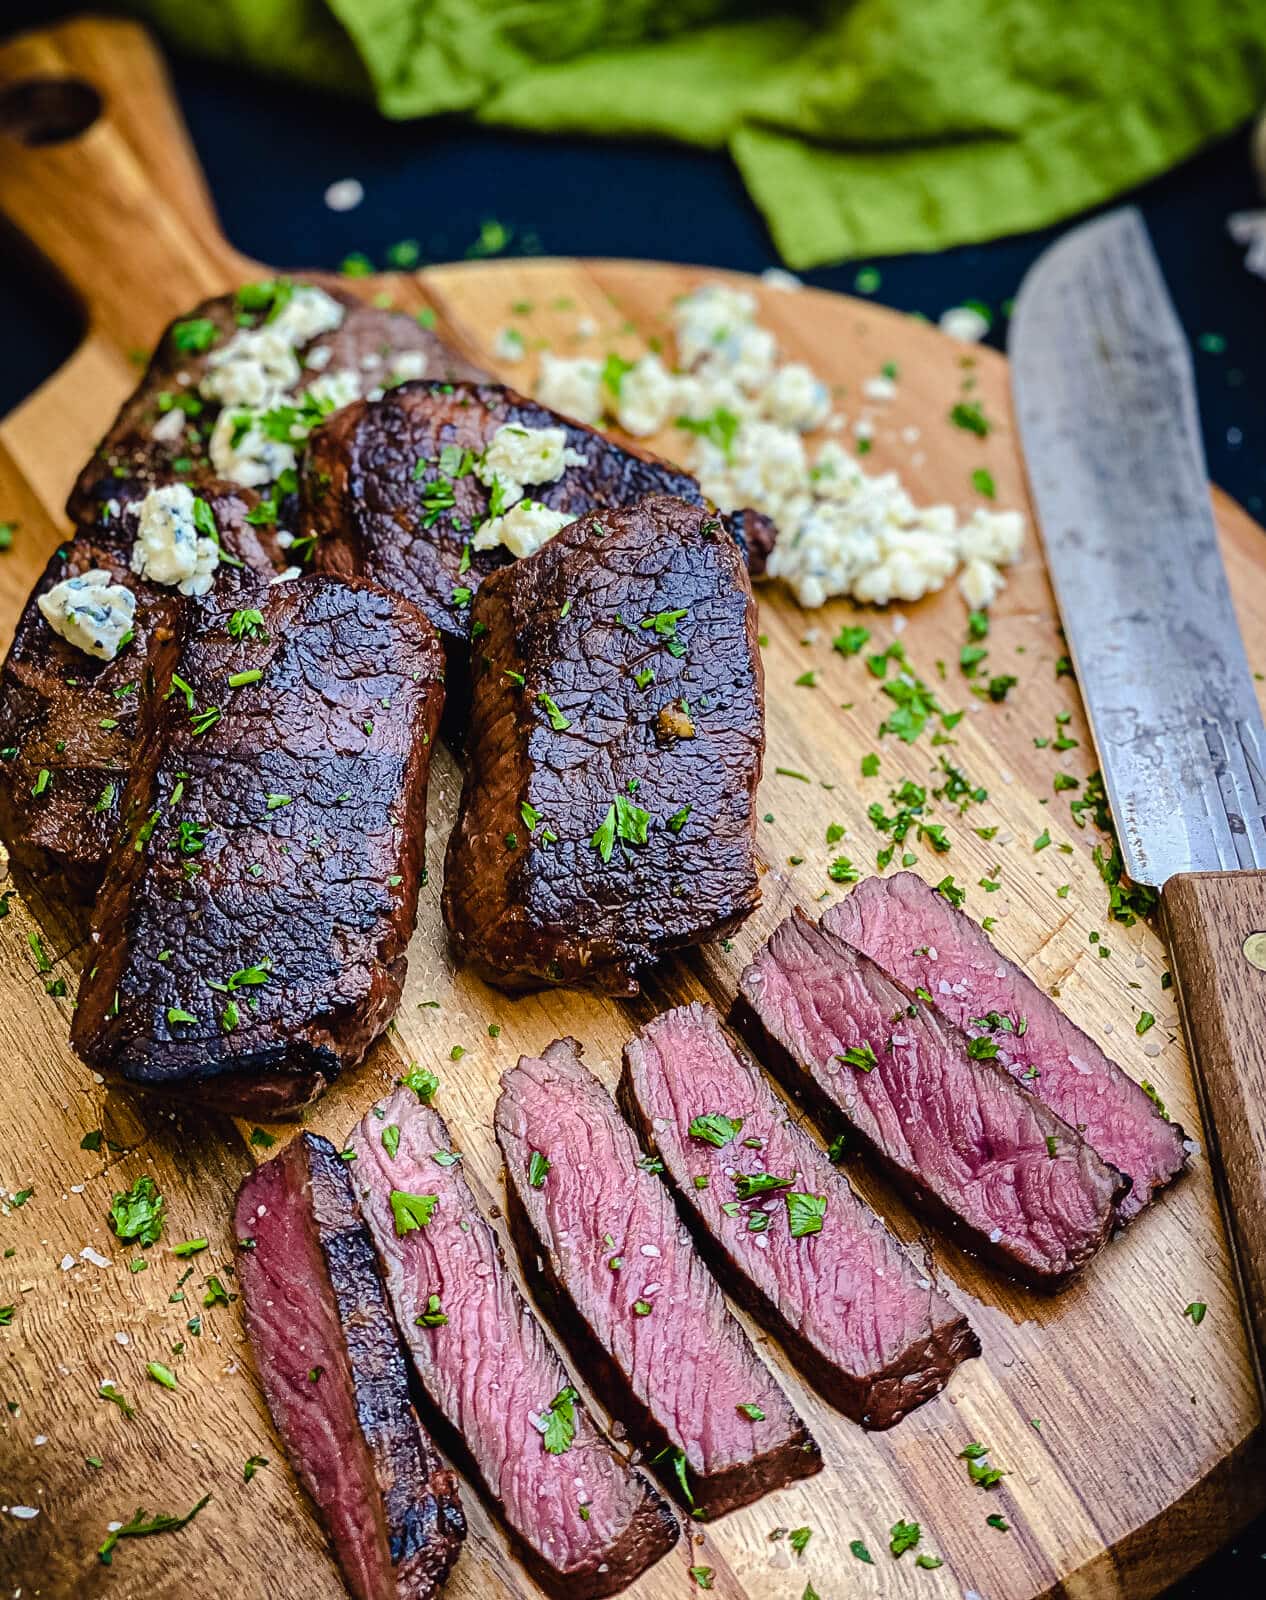 HOW TO GRILL VENISON STEAKS